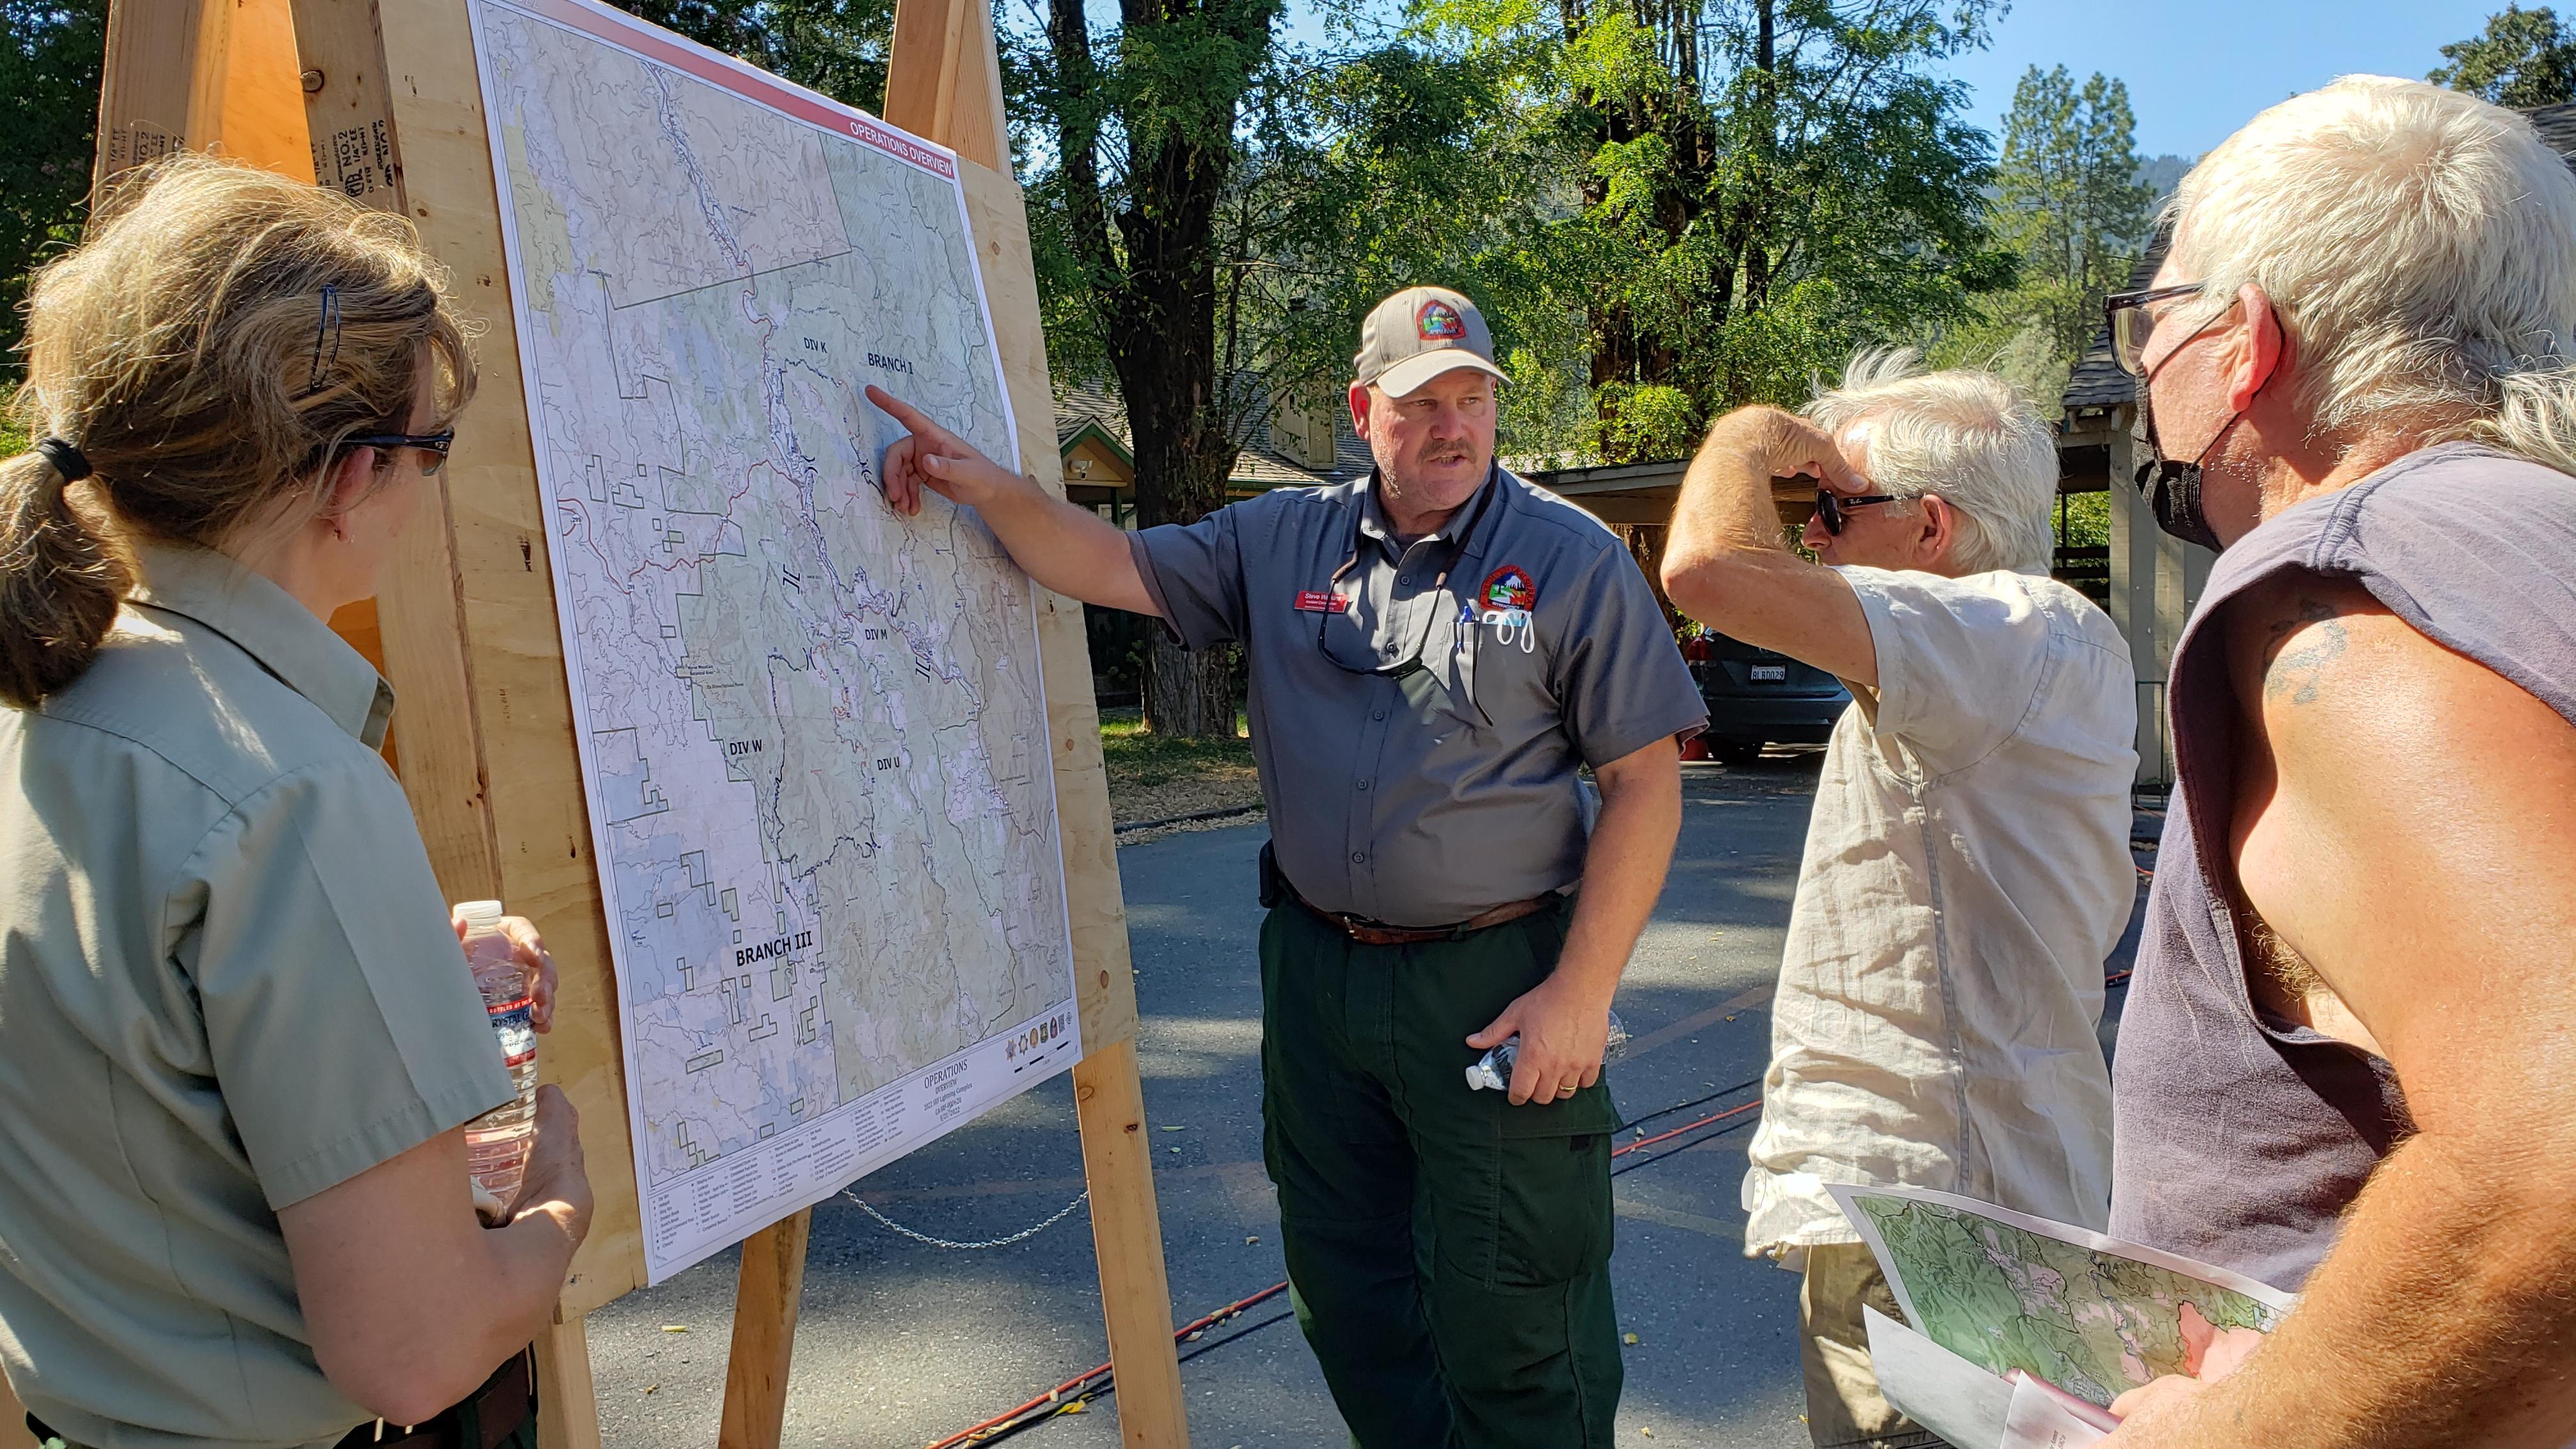 Two residents look at a map posted on a board with a member of CAIIMT14